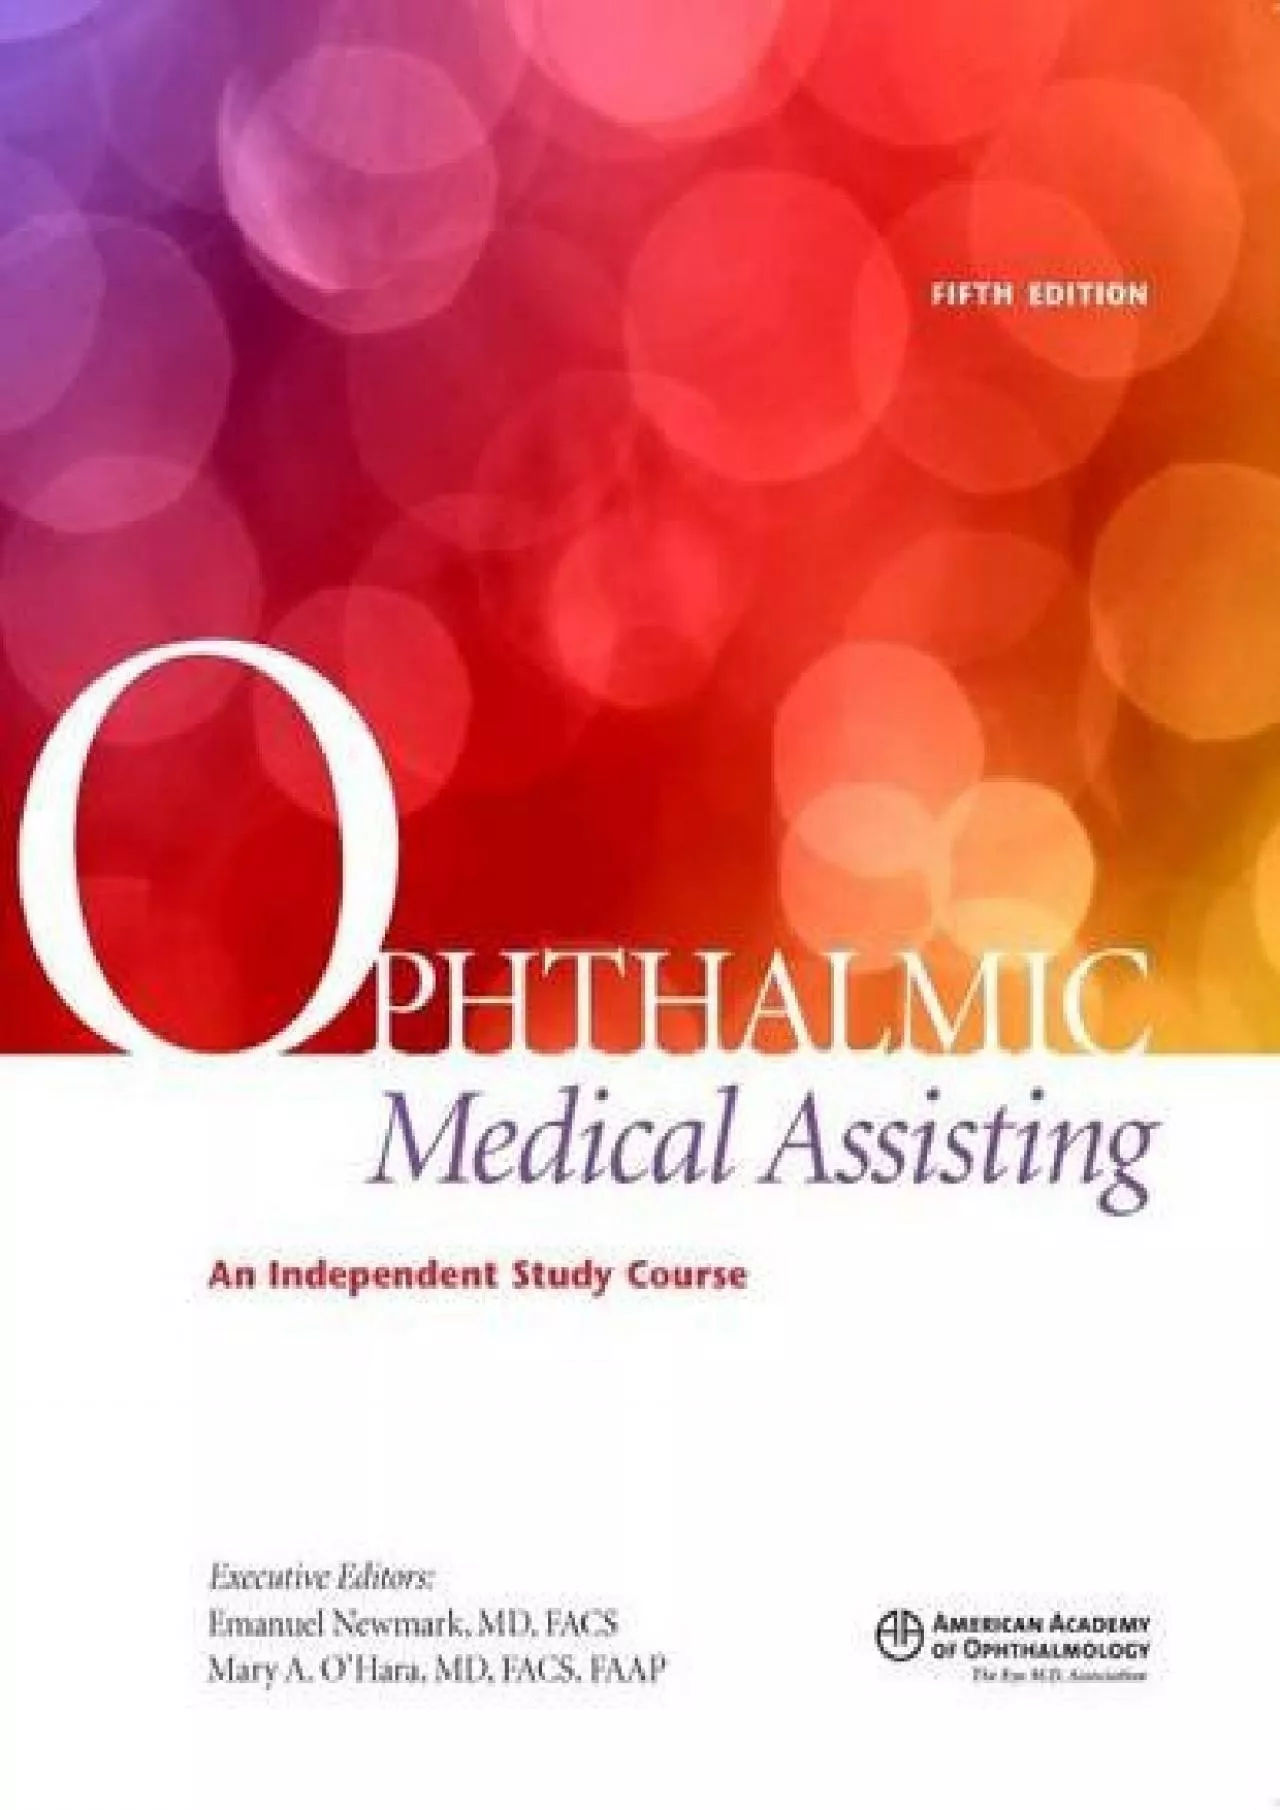 (READ)-Ophthalmic Medical Assisting: An Independent Study Course, 5th ed. (Textbook)